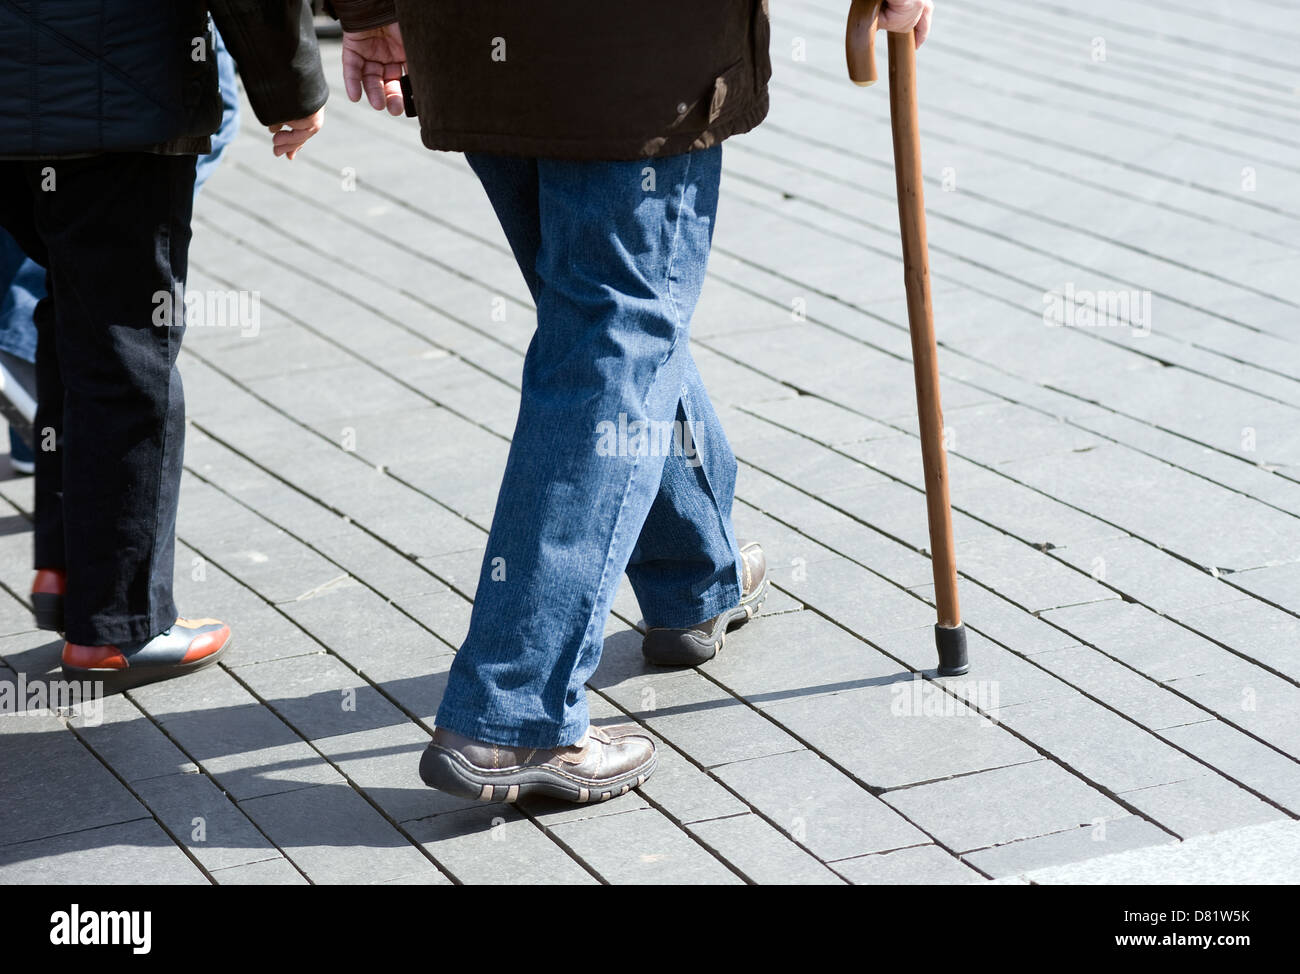 An old man walking on the street with a walking stick Stock Photo